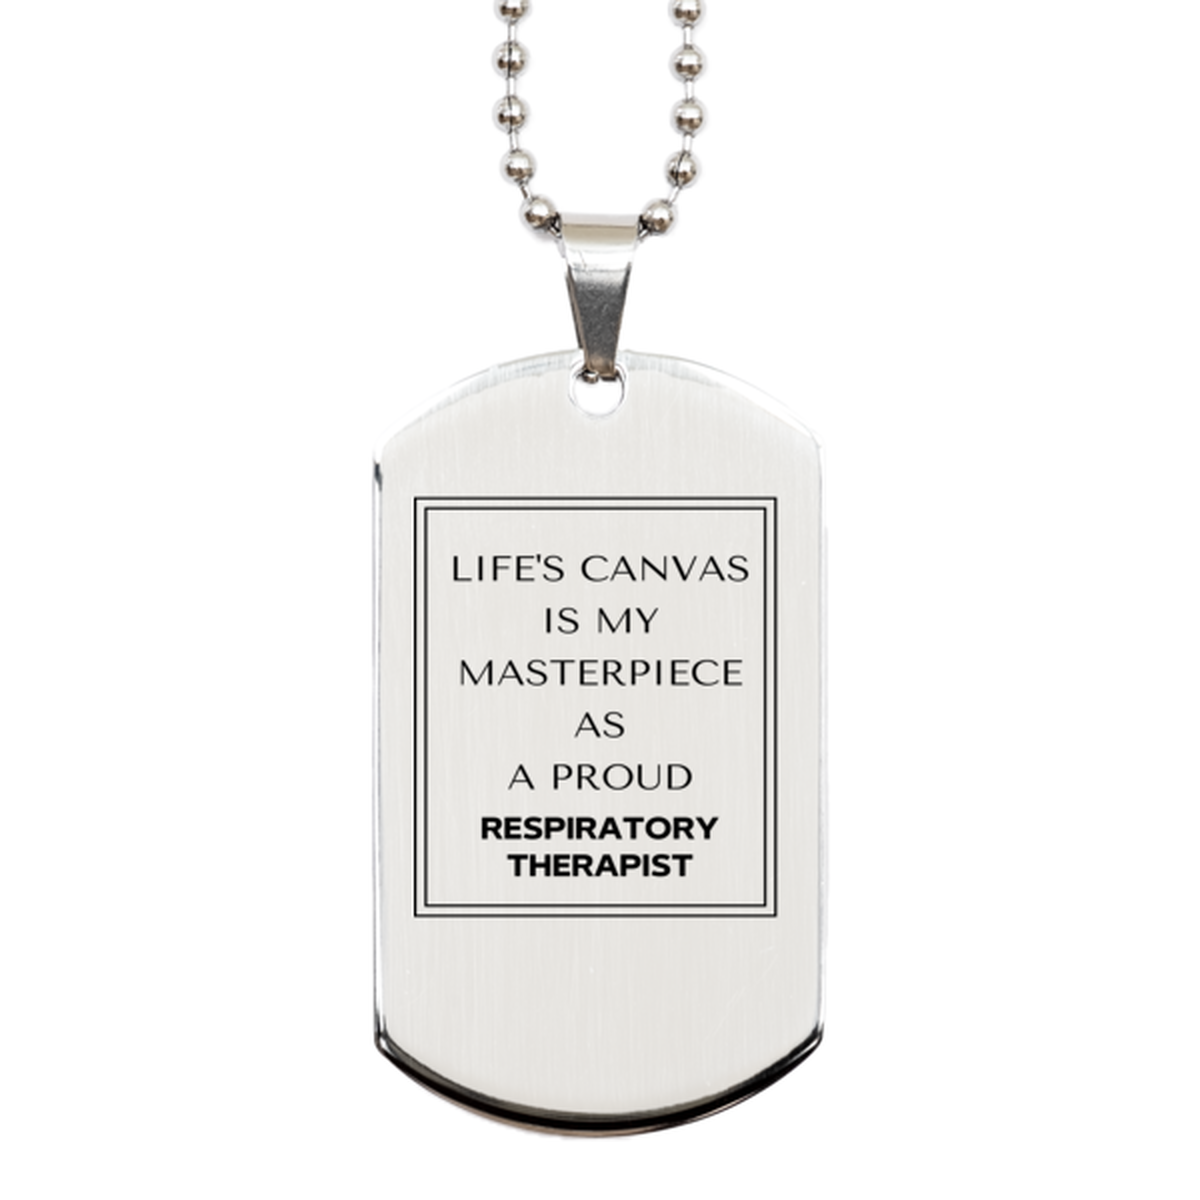 Proud Respiratory Therapist Gifts, Life's canvas is my masterpiece, Epic Birthday Christmas Unique Silver Dog Tag For Respiratory Therapist, Coworkers, Men, Women, Friends